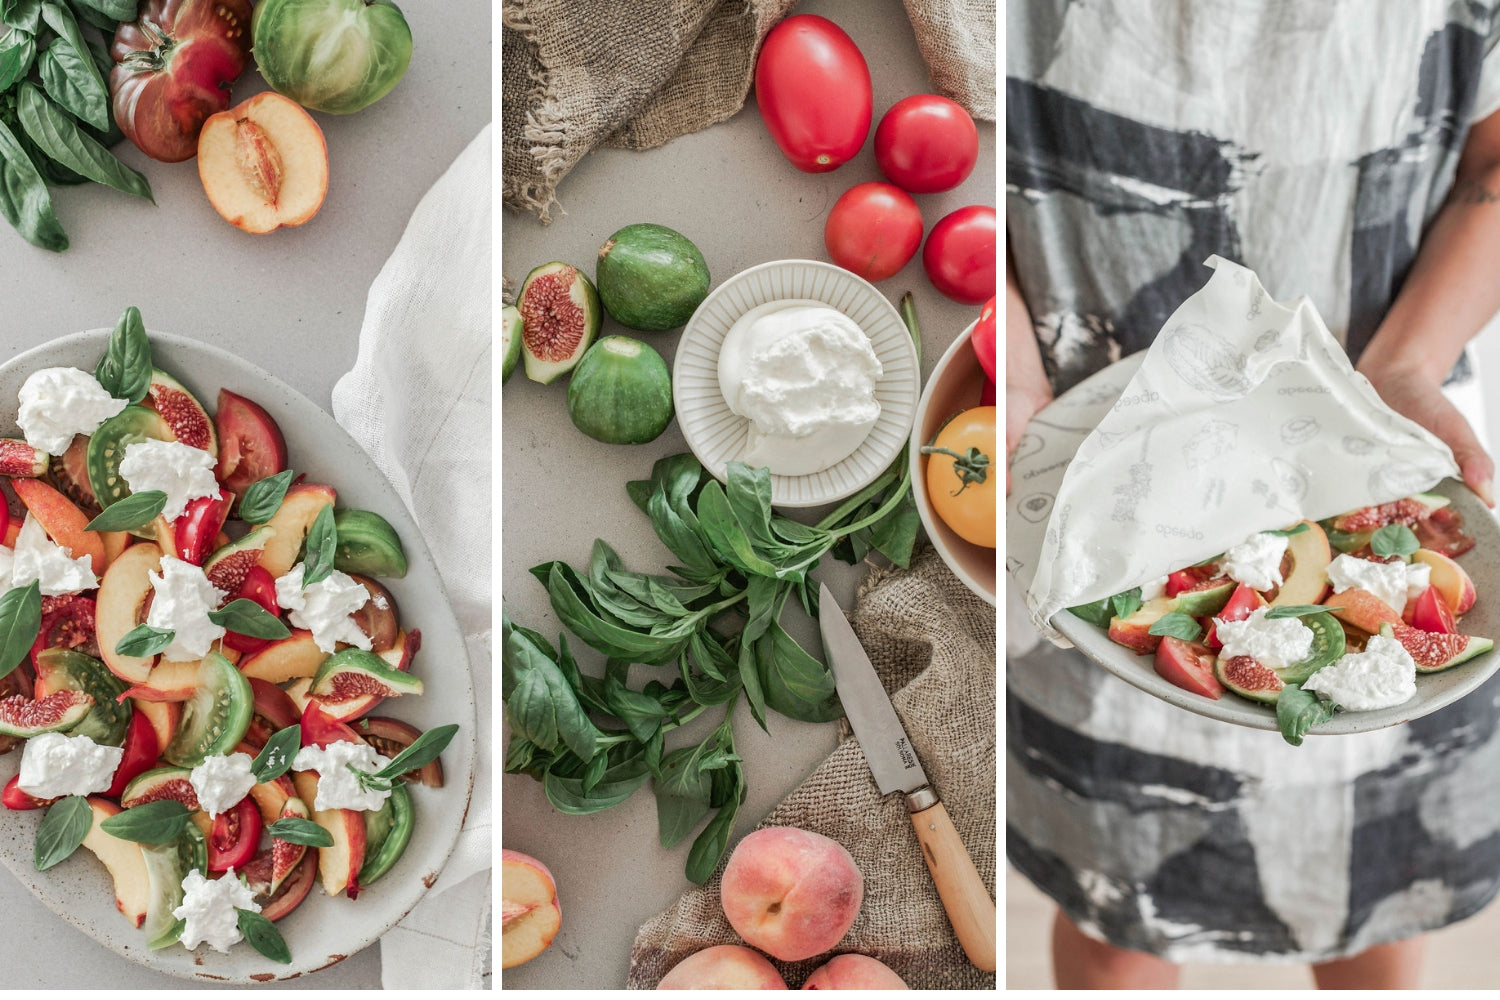 Burrata Salad with Tomatoes | Abeego | Reusable Beeswax Food Wrap that Breathes